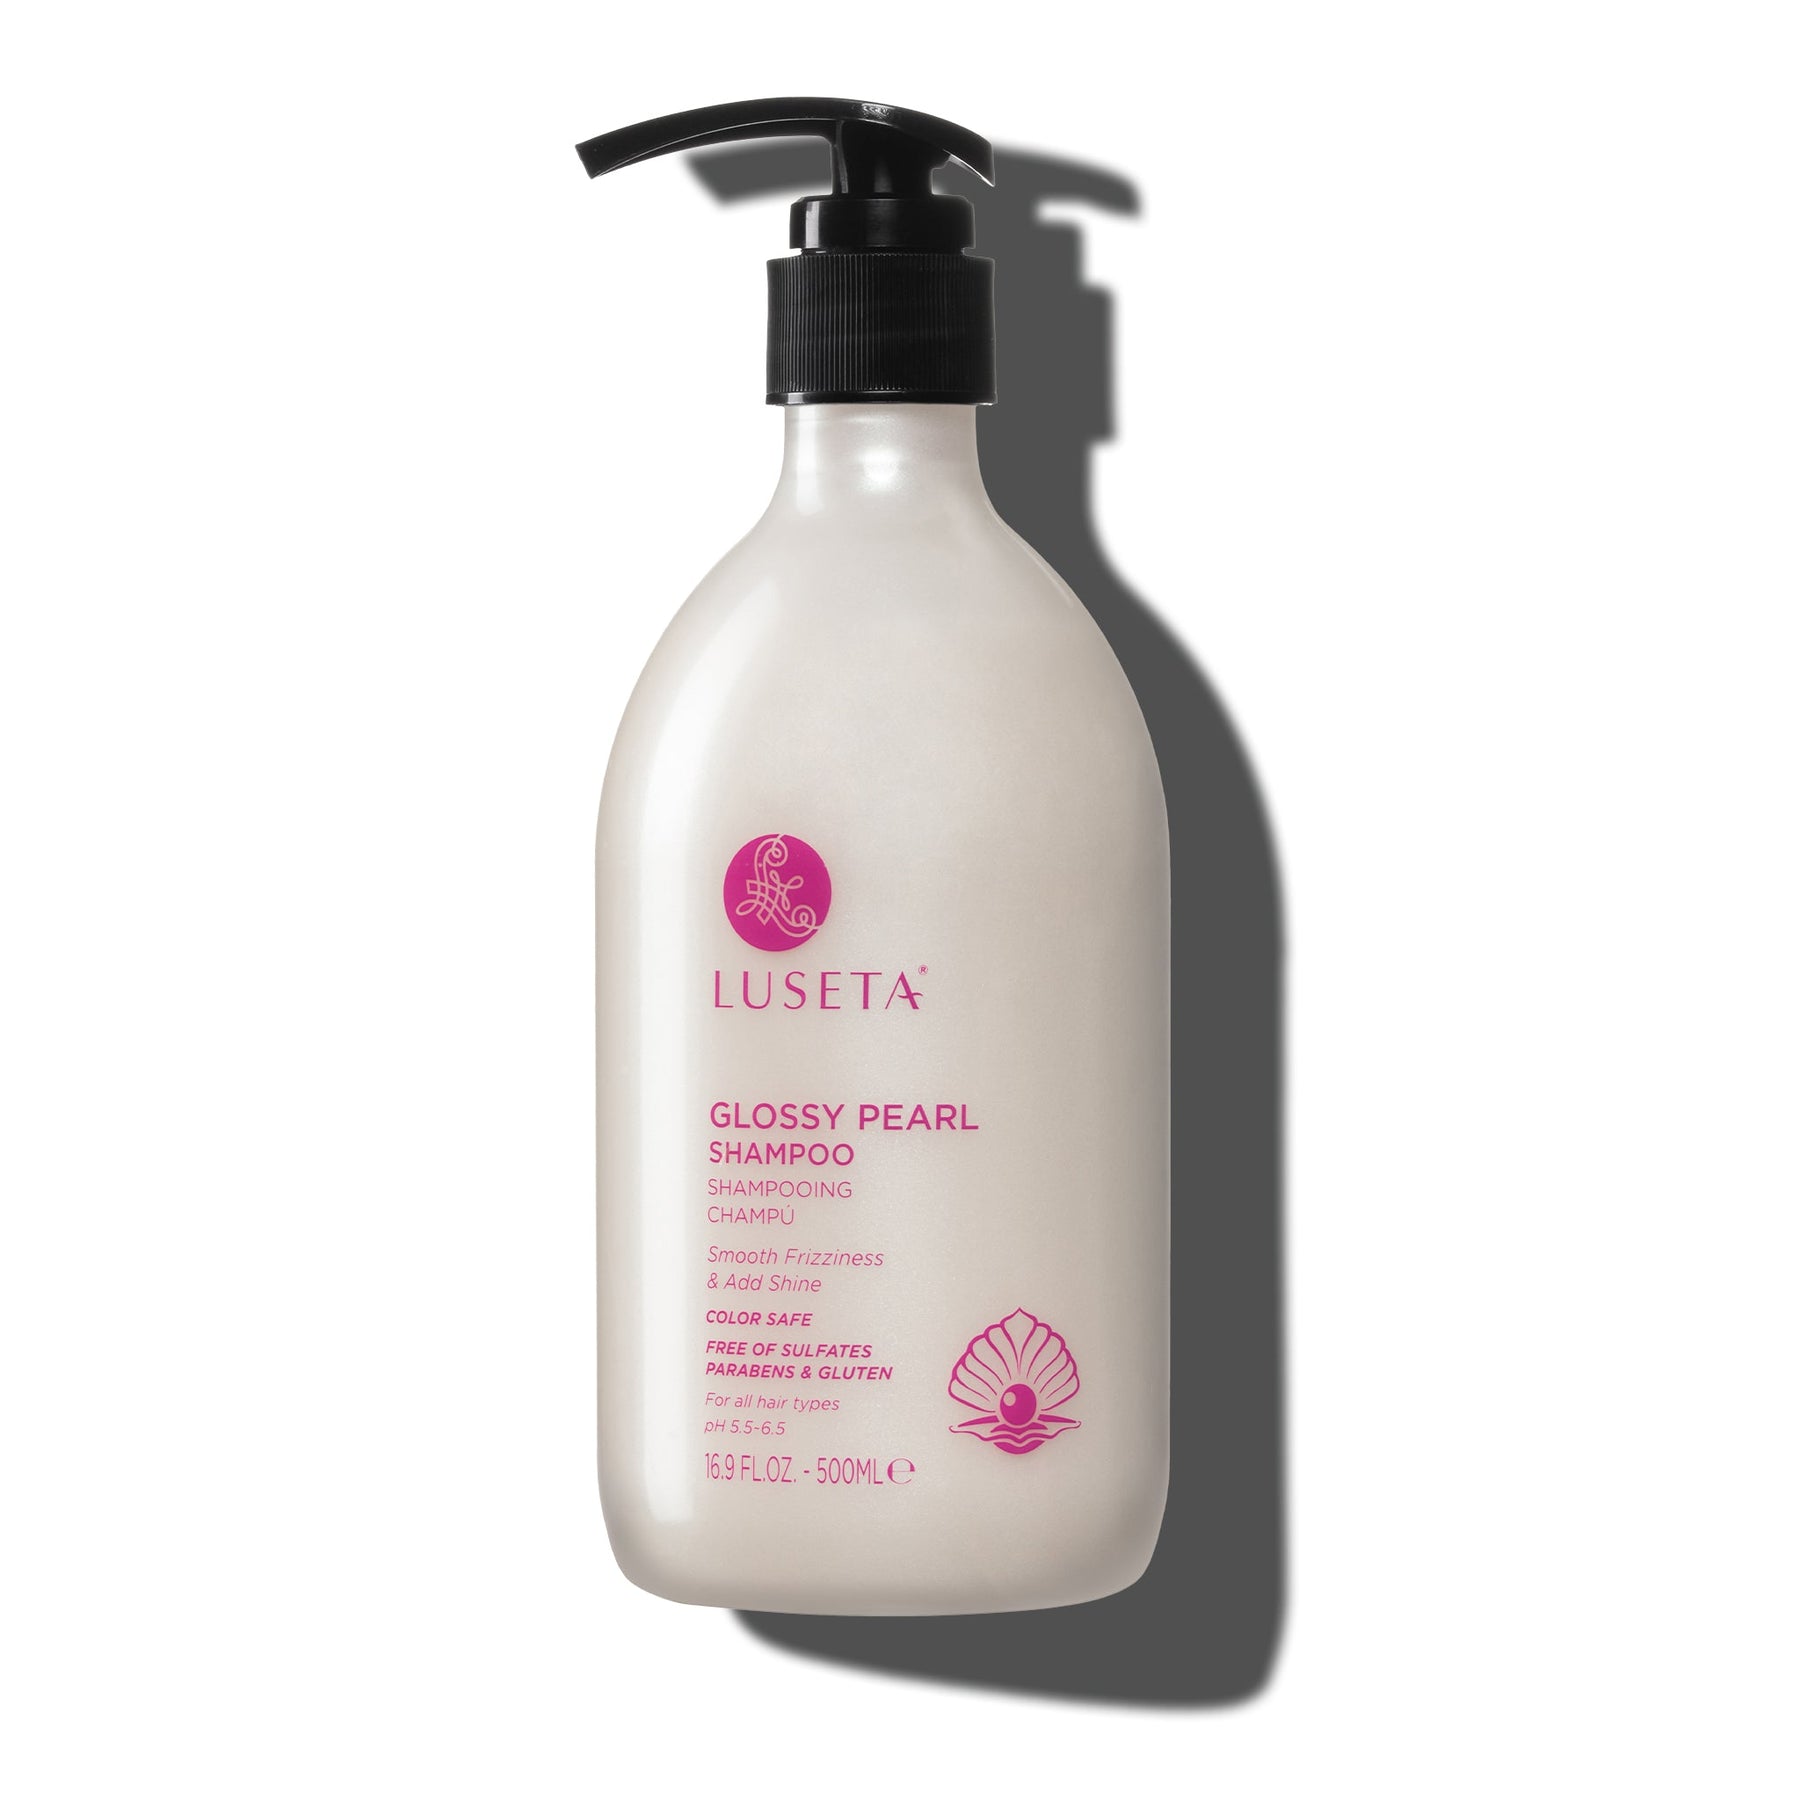 Glossy Pearl Shampoo - by Luseta Beauty |ProCare Outlet|